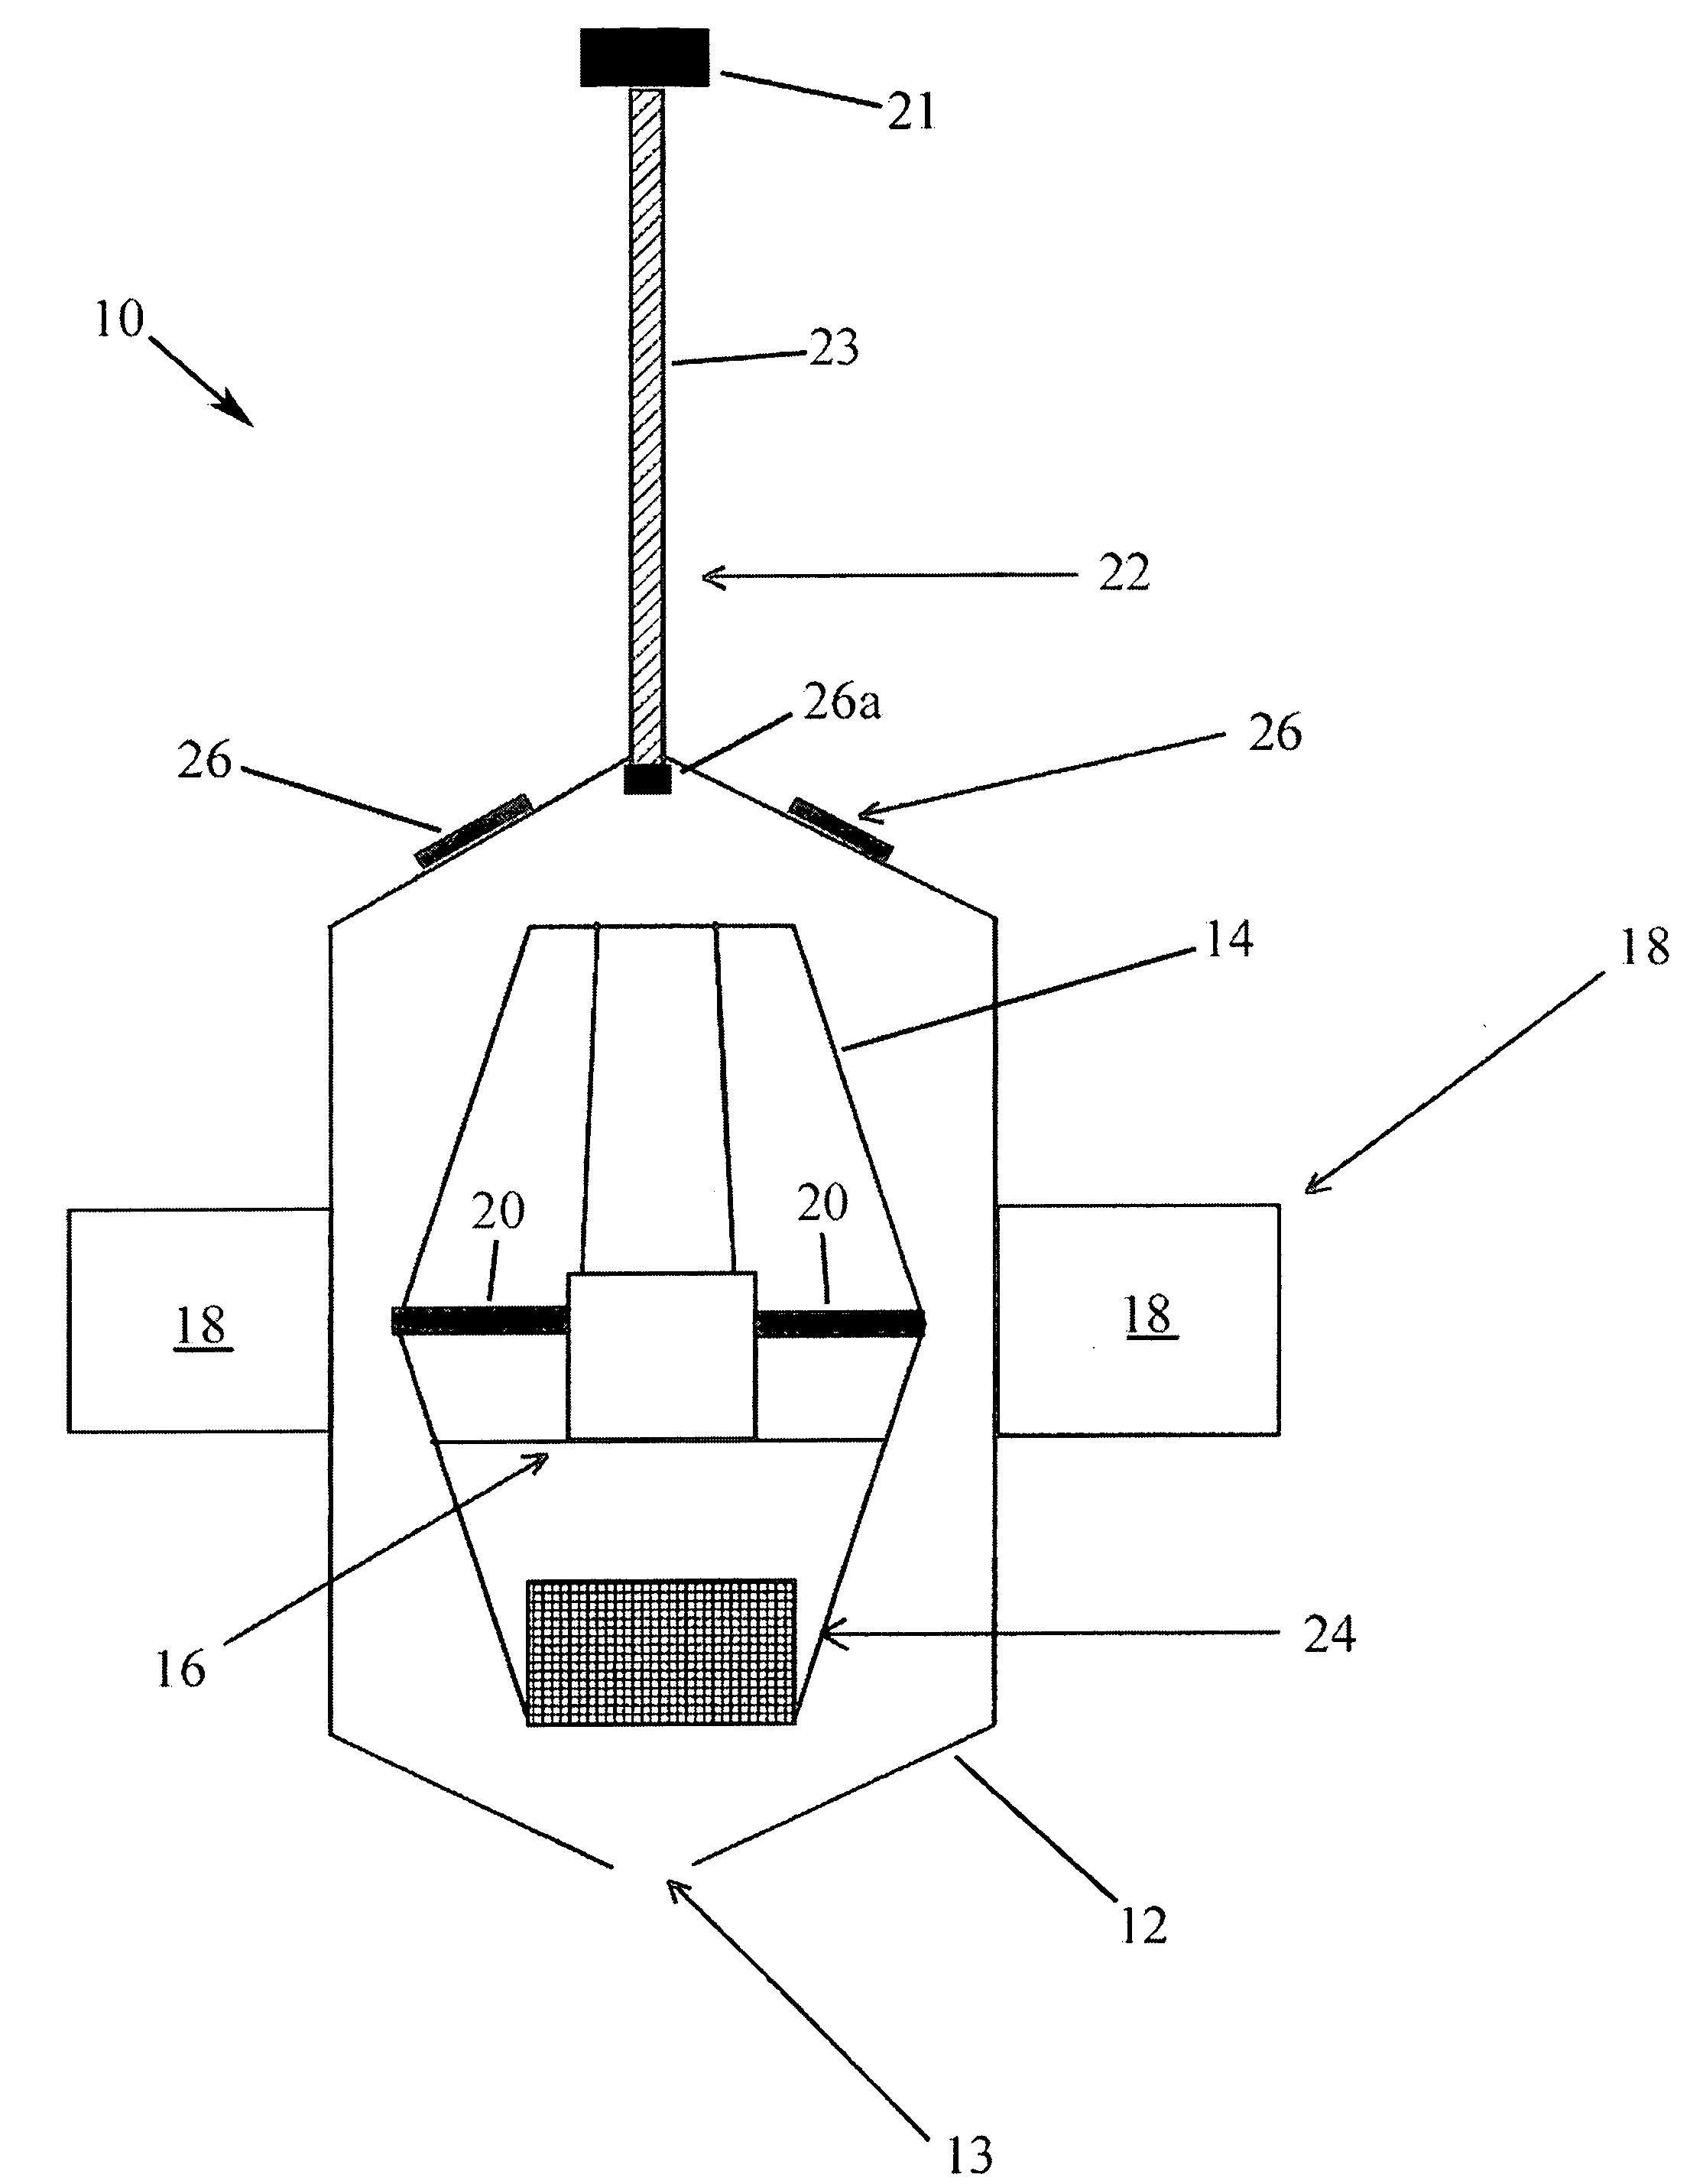 Buoyancy Vehicle Apparatus to Create Electrical Power